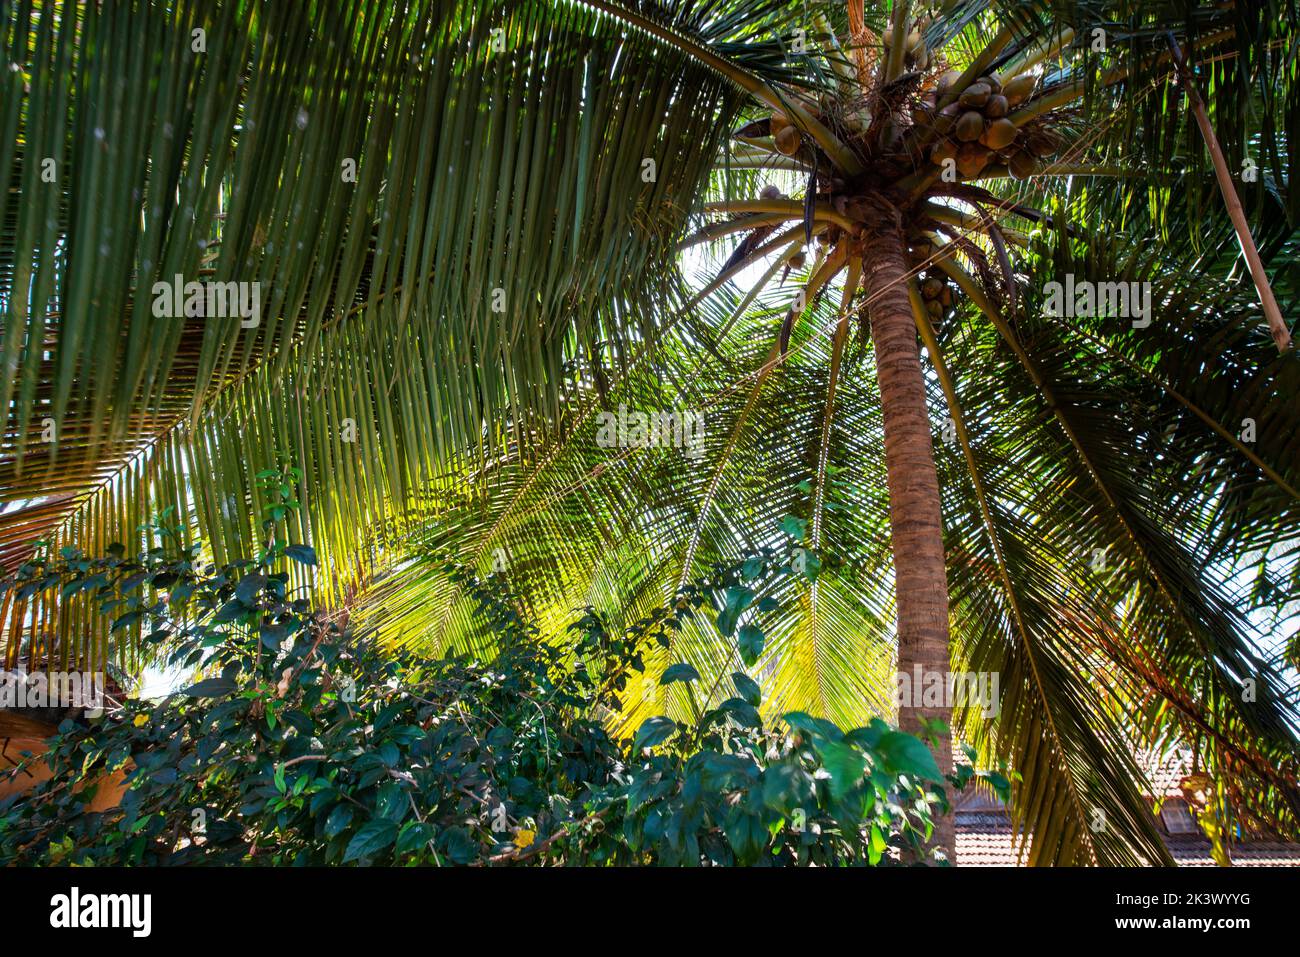 Amazing view in the sky with coconut tree tops in Karnataka state, Goa state or Kerala state in India as background! Courtyard of a small hotel. Cocon Stock Photo